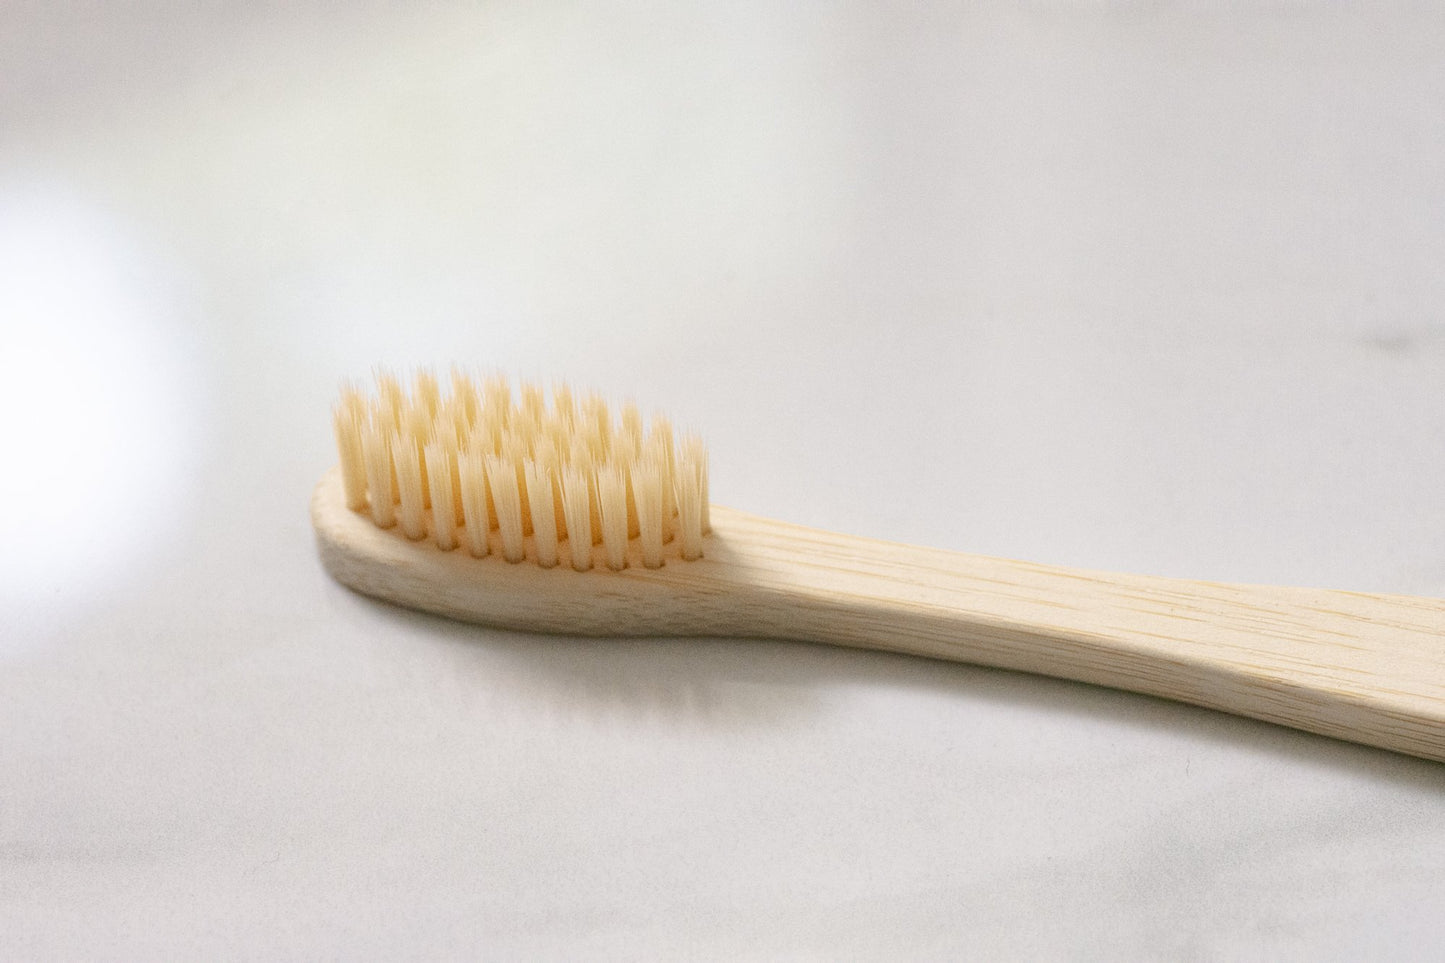 MOSO Bamboo Toothbrush - Case of 10